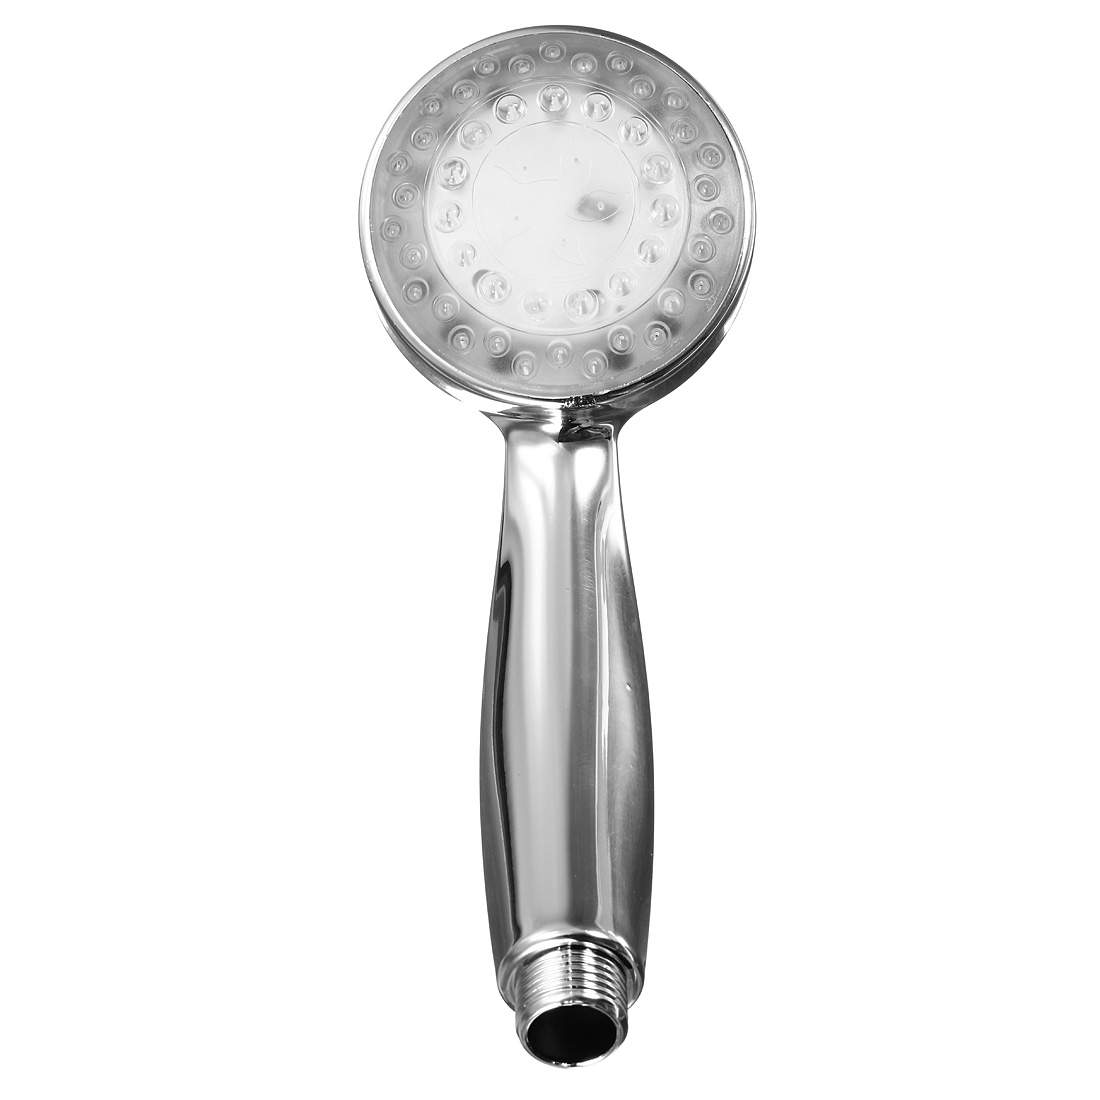 Chrome-Bathroom-Handheld-ABS-LED-Shower-Head-7-Color-Changing-Water-Glow-Light-1442625-5